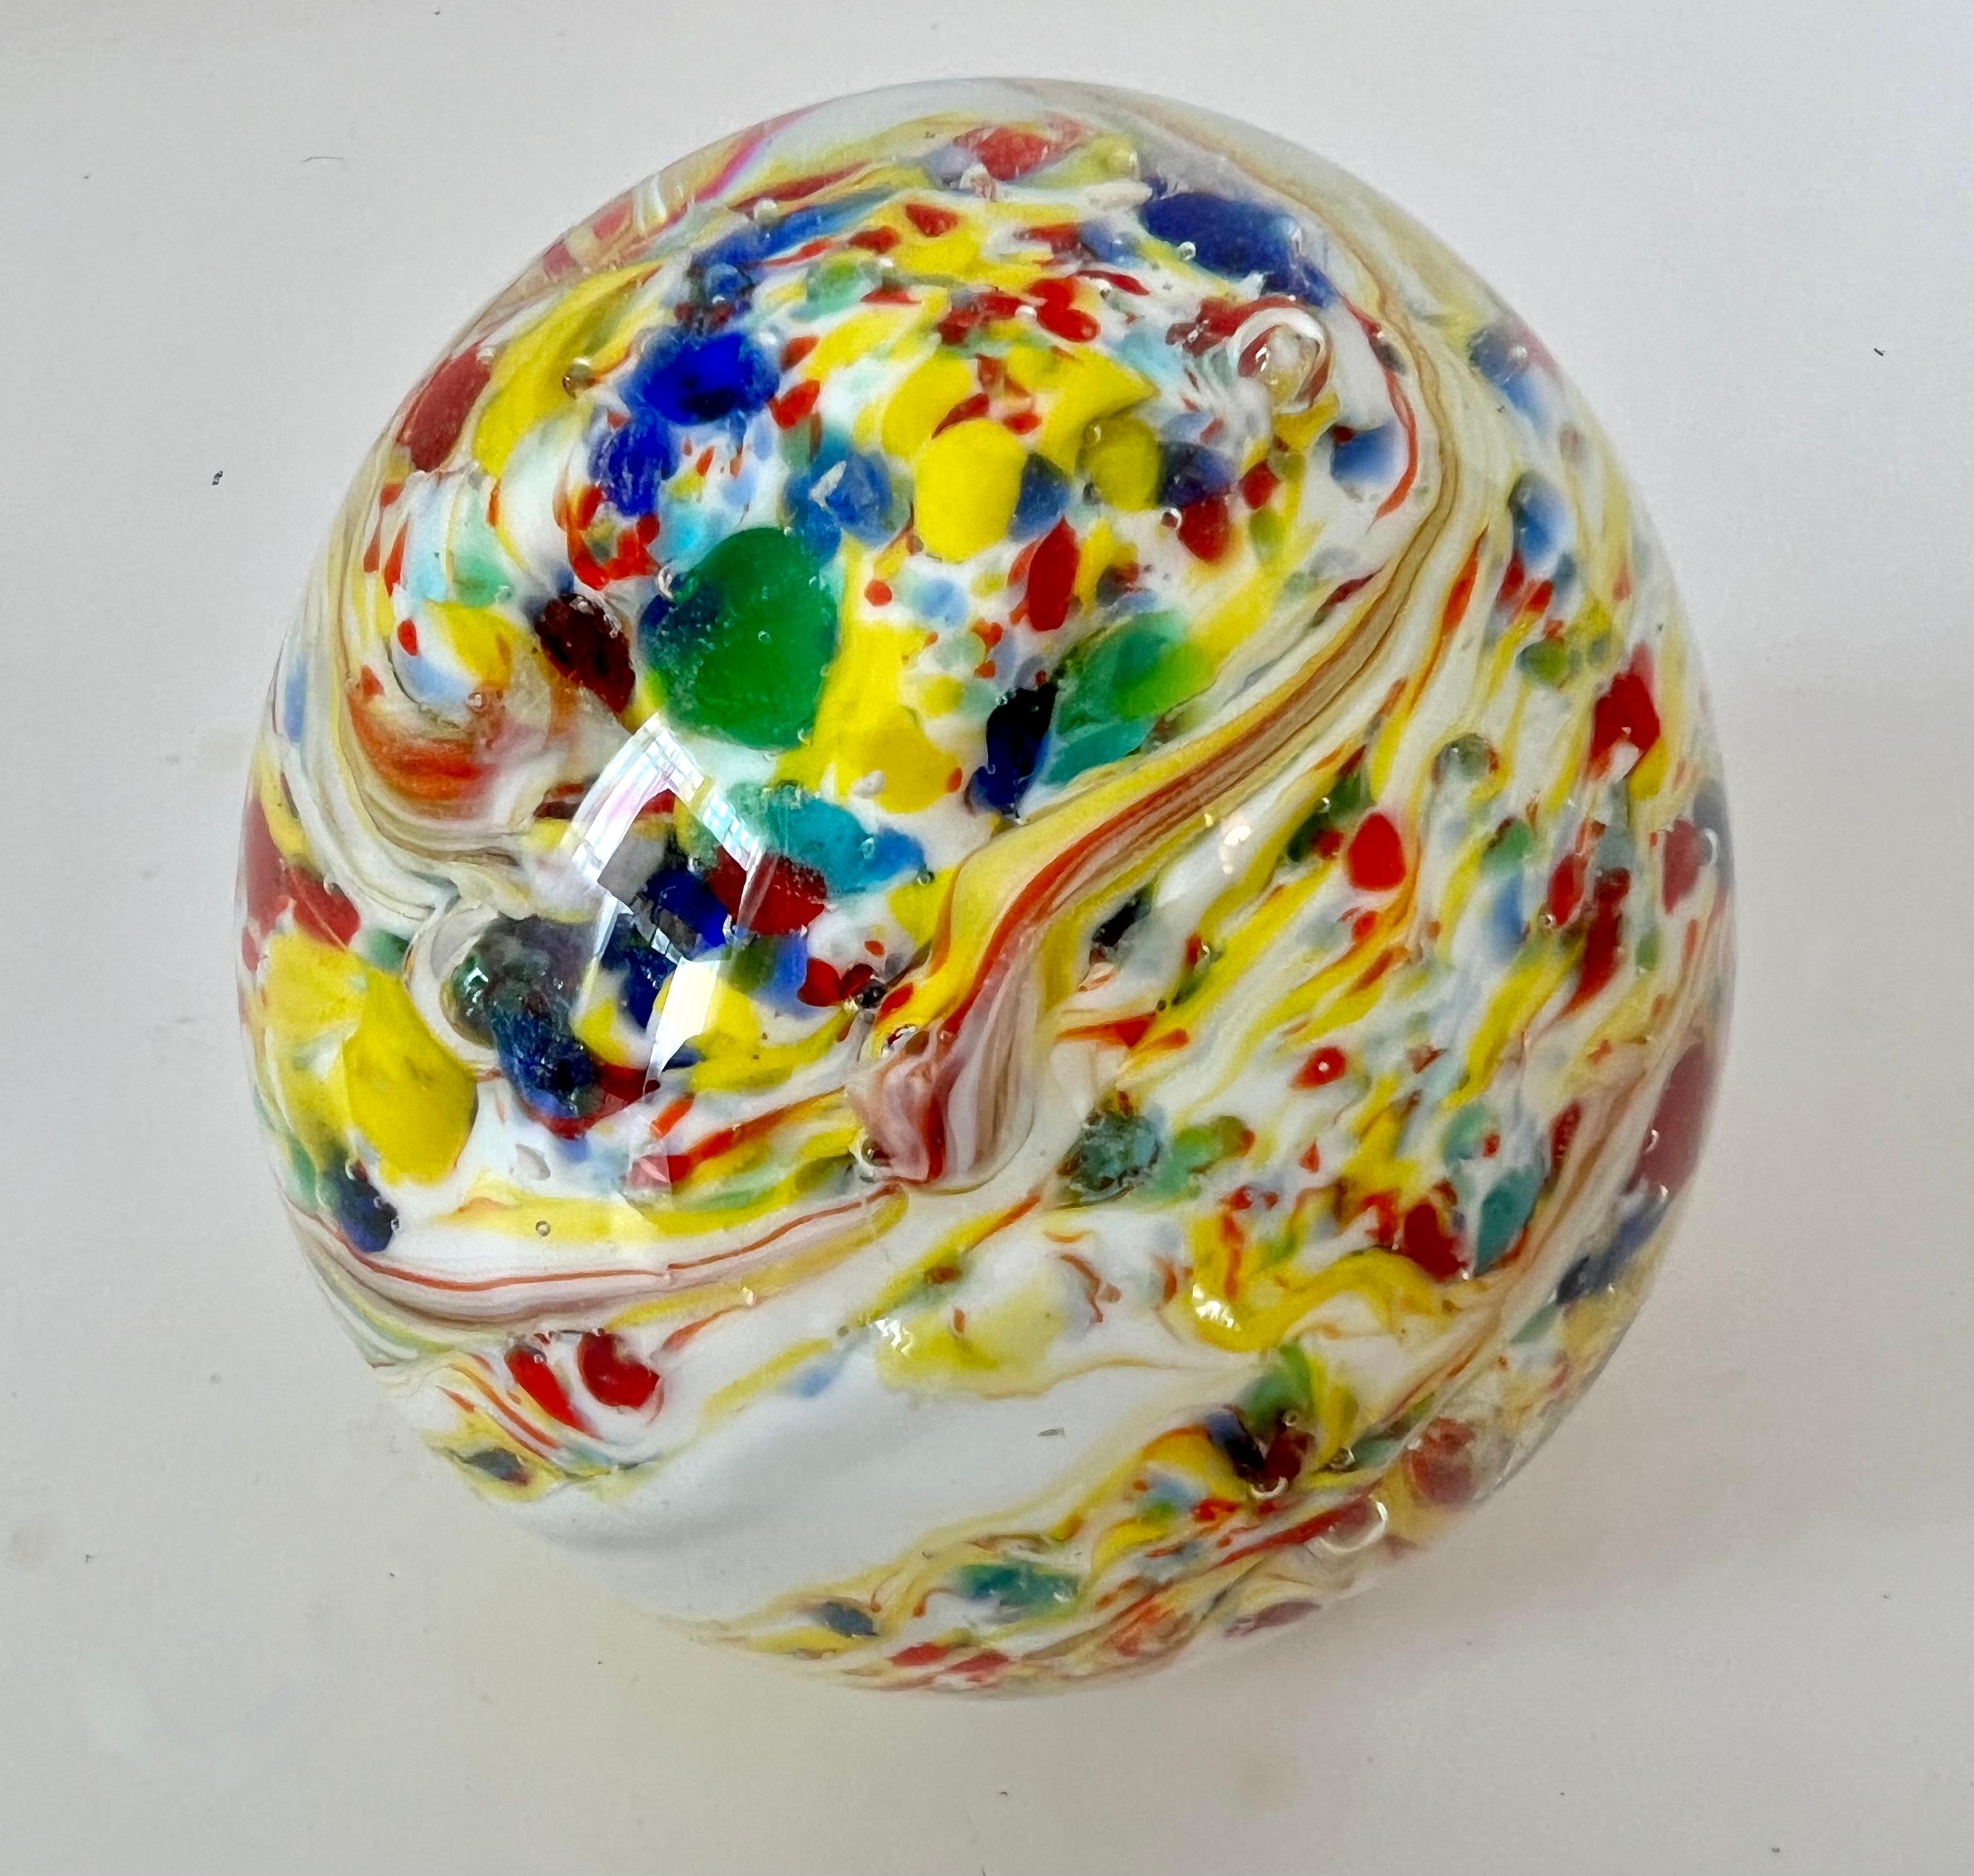 A lovely hand Blown Art glass or Murano paperweight.  The piece is of good size at 3-4